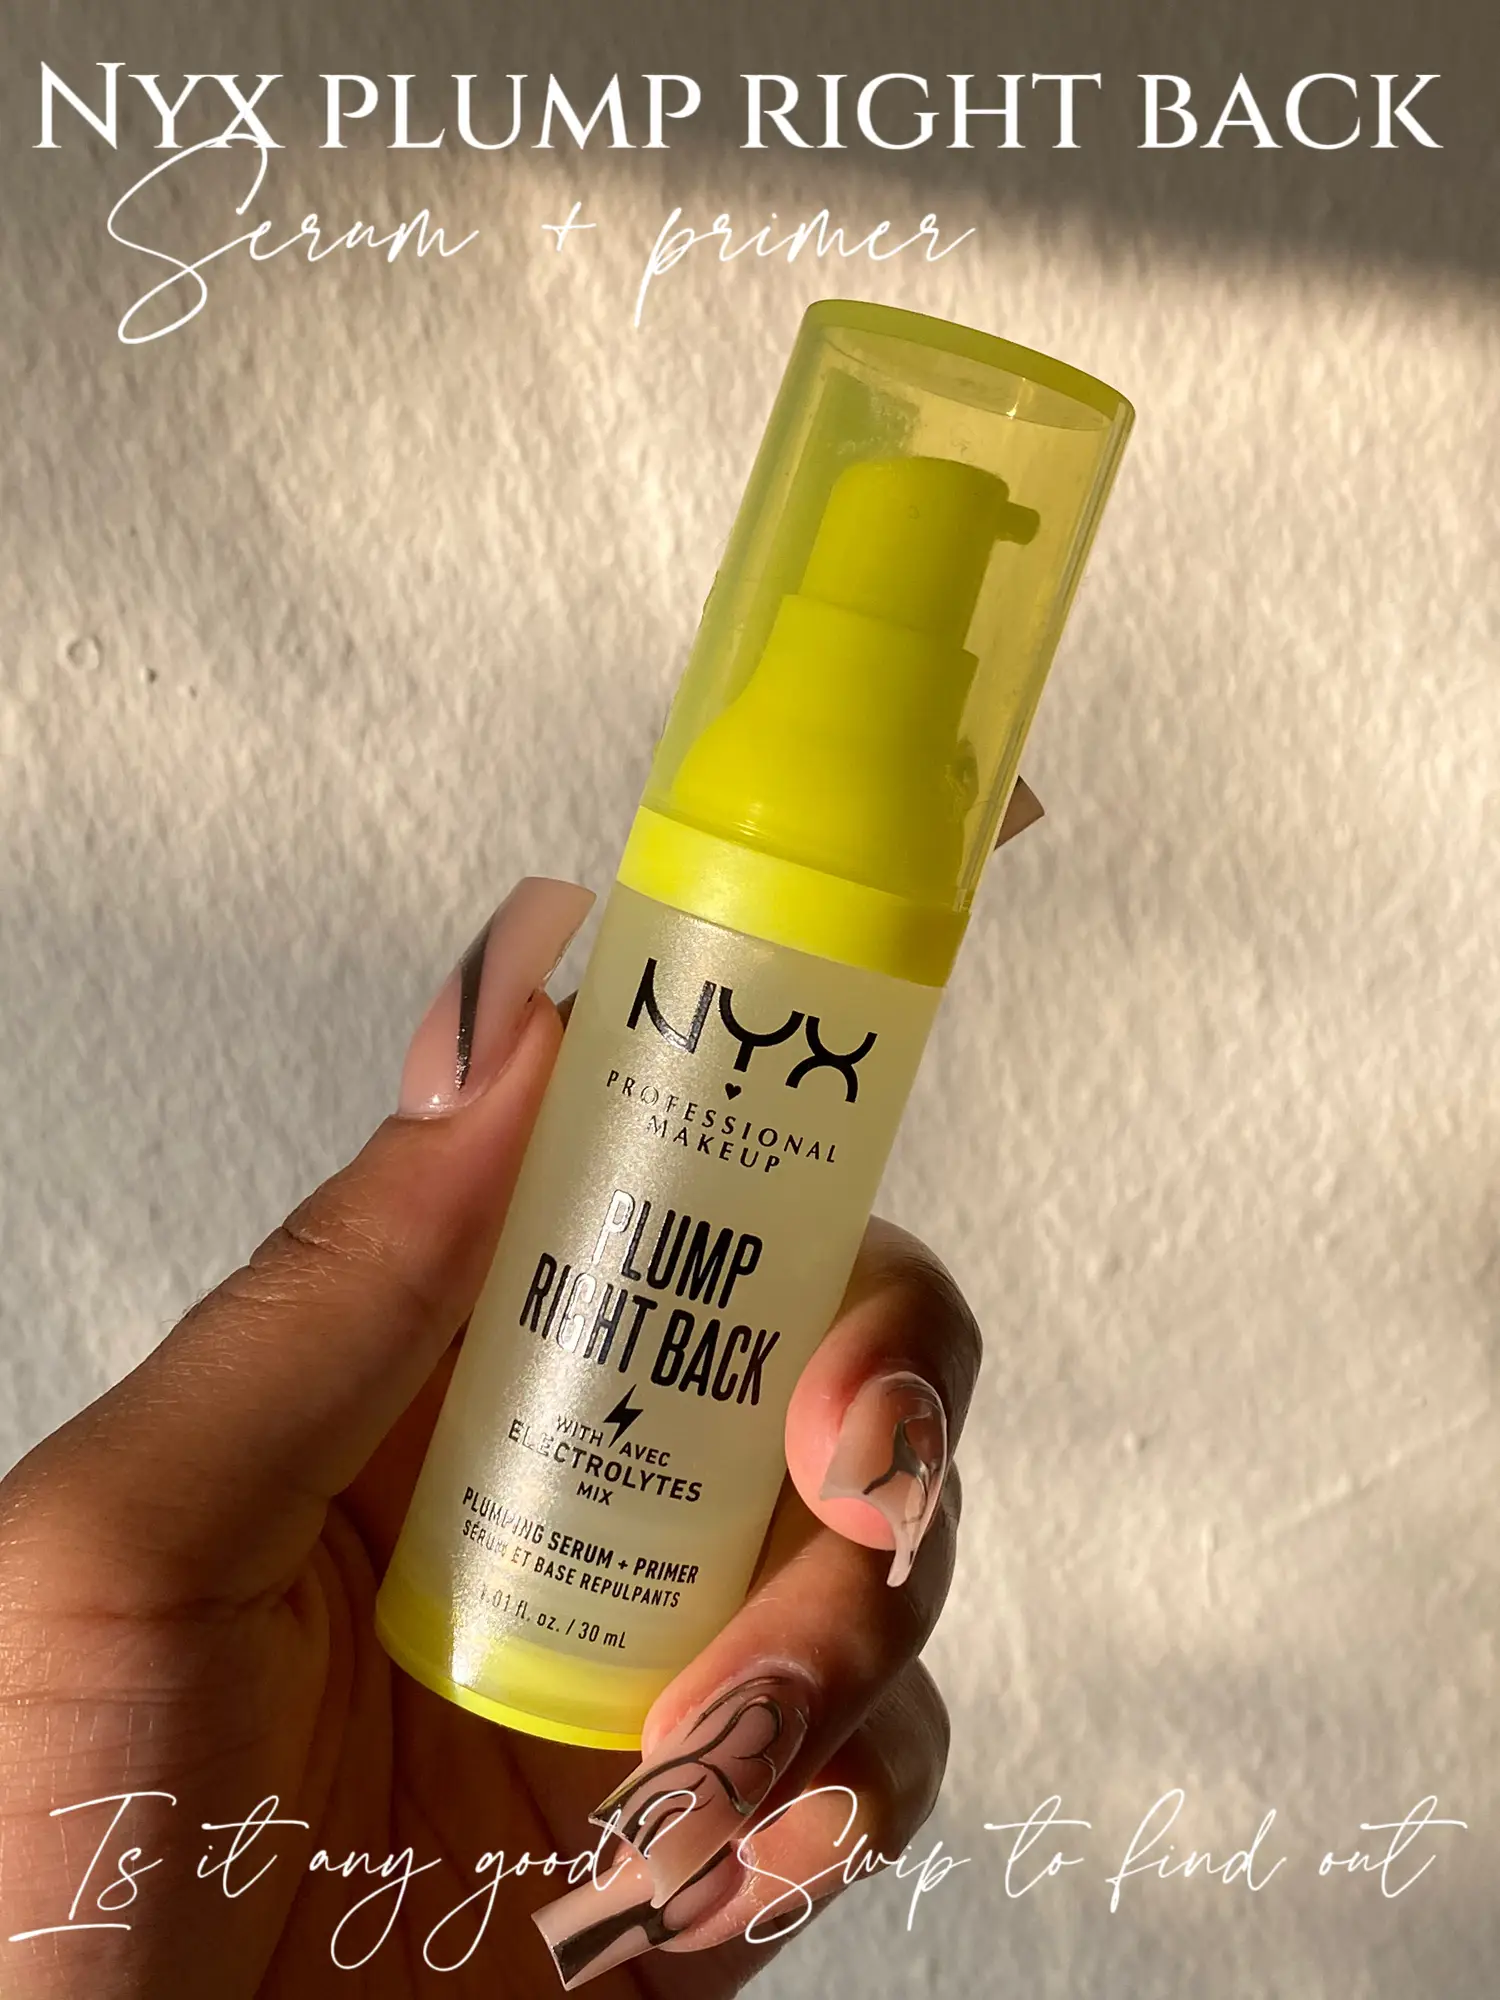 Nyx plumping primer review | Gallery posted by Kenyasterling | Lemon8